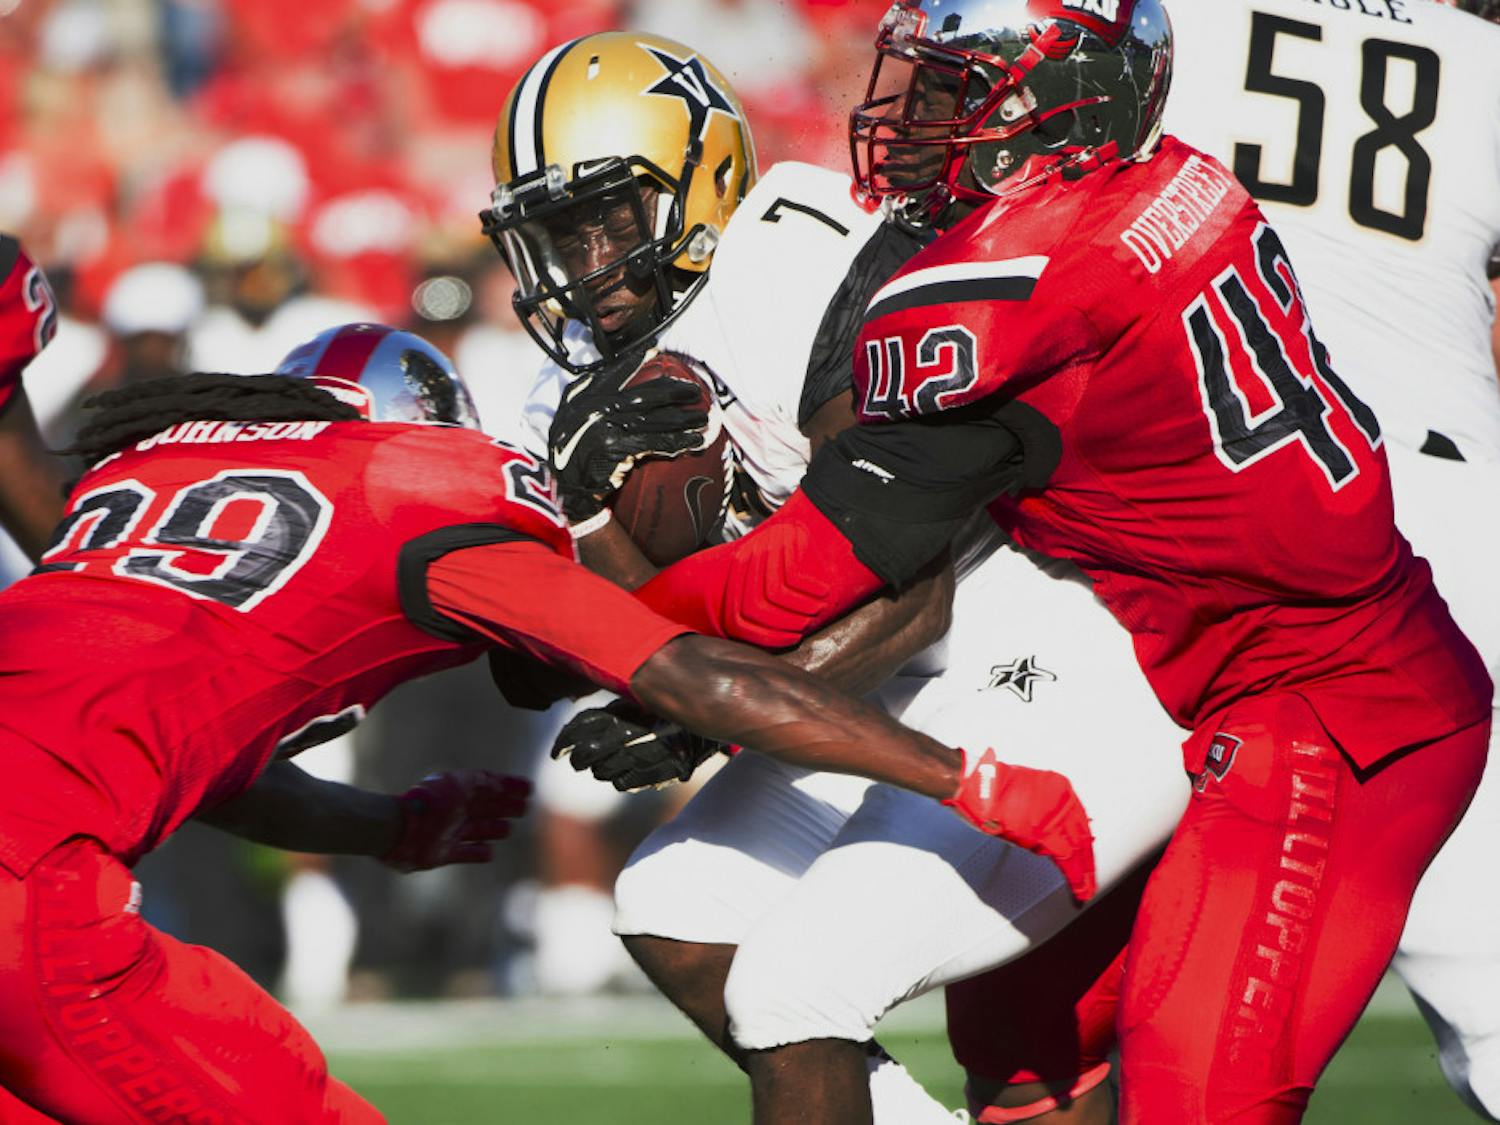 Vanderbilt University running back Ralph Webb (7) is tackled by multiple Western Kentucky University players in an NCAA college football game, Saturday, Sept. 24, 2016, in Bowling Green, Ky. (AP Photo/Michael Noble Jr.)